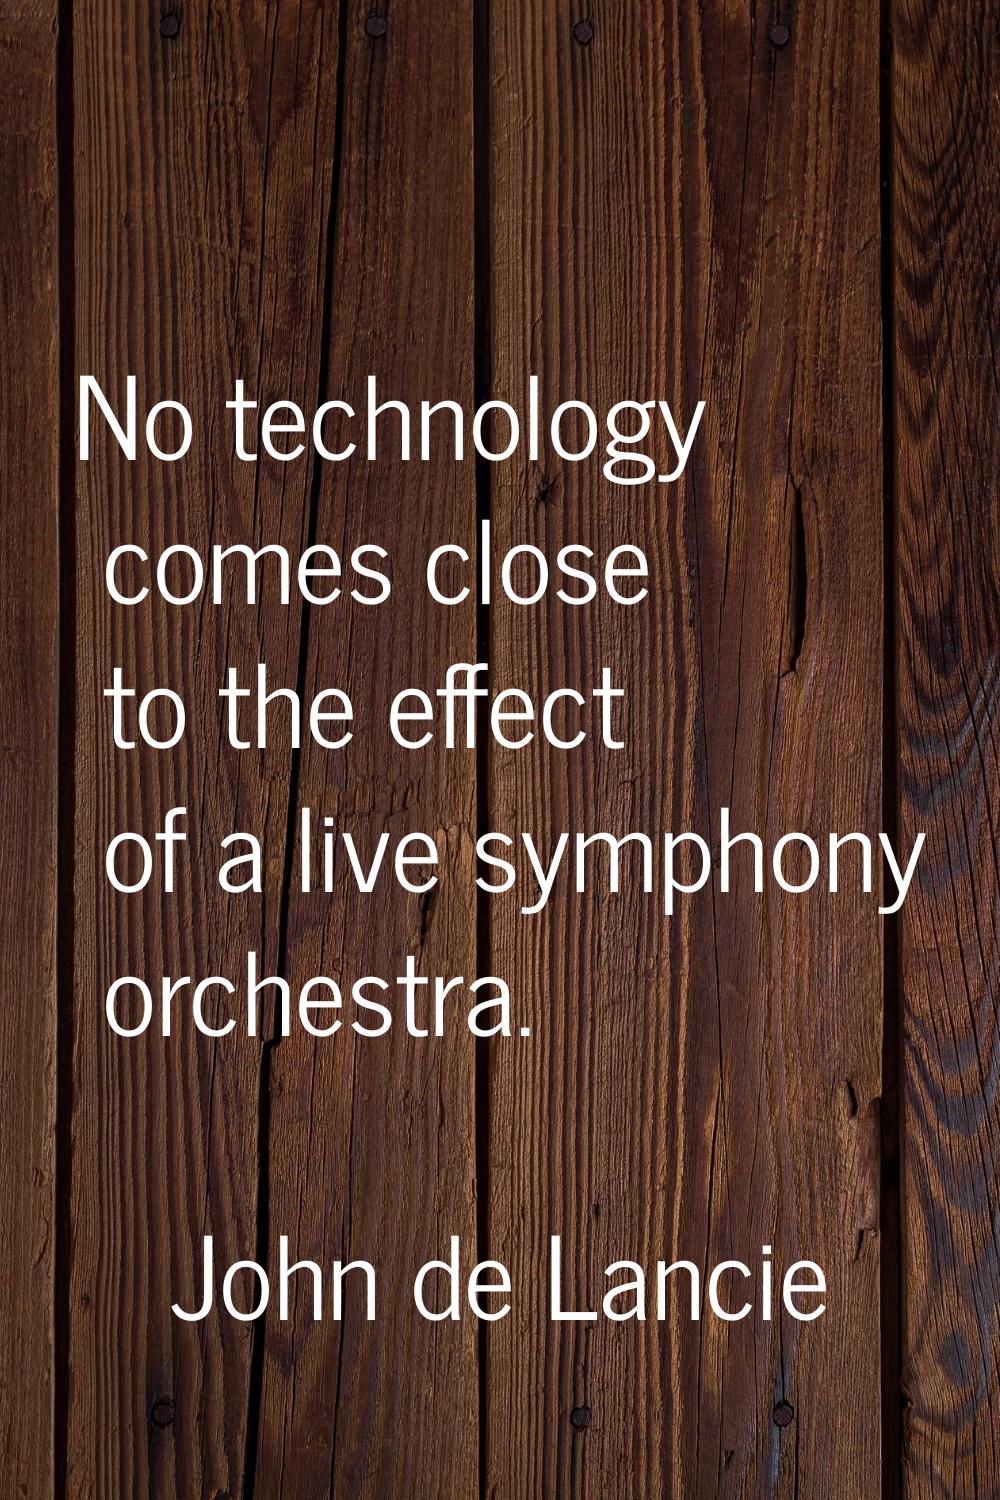 No technology comes close to the effect of a live symphony orchestra.